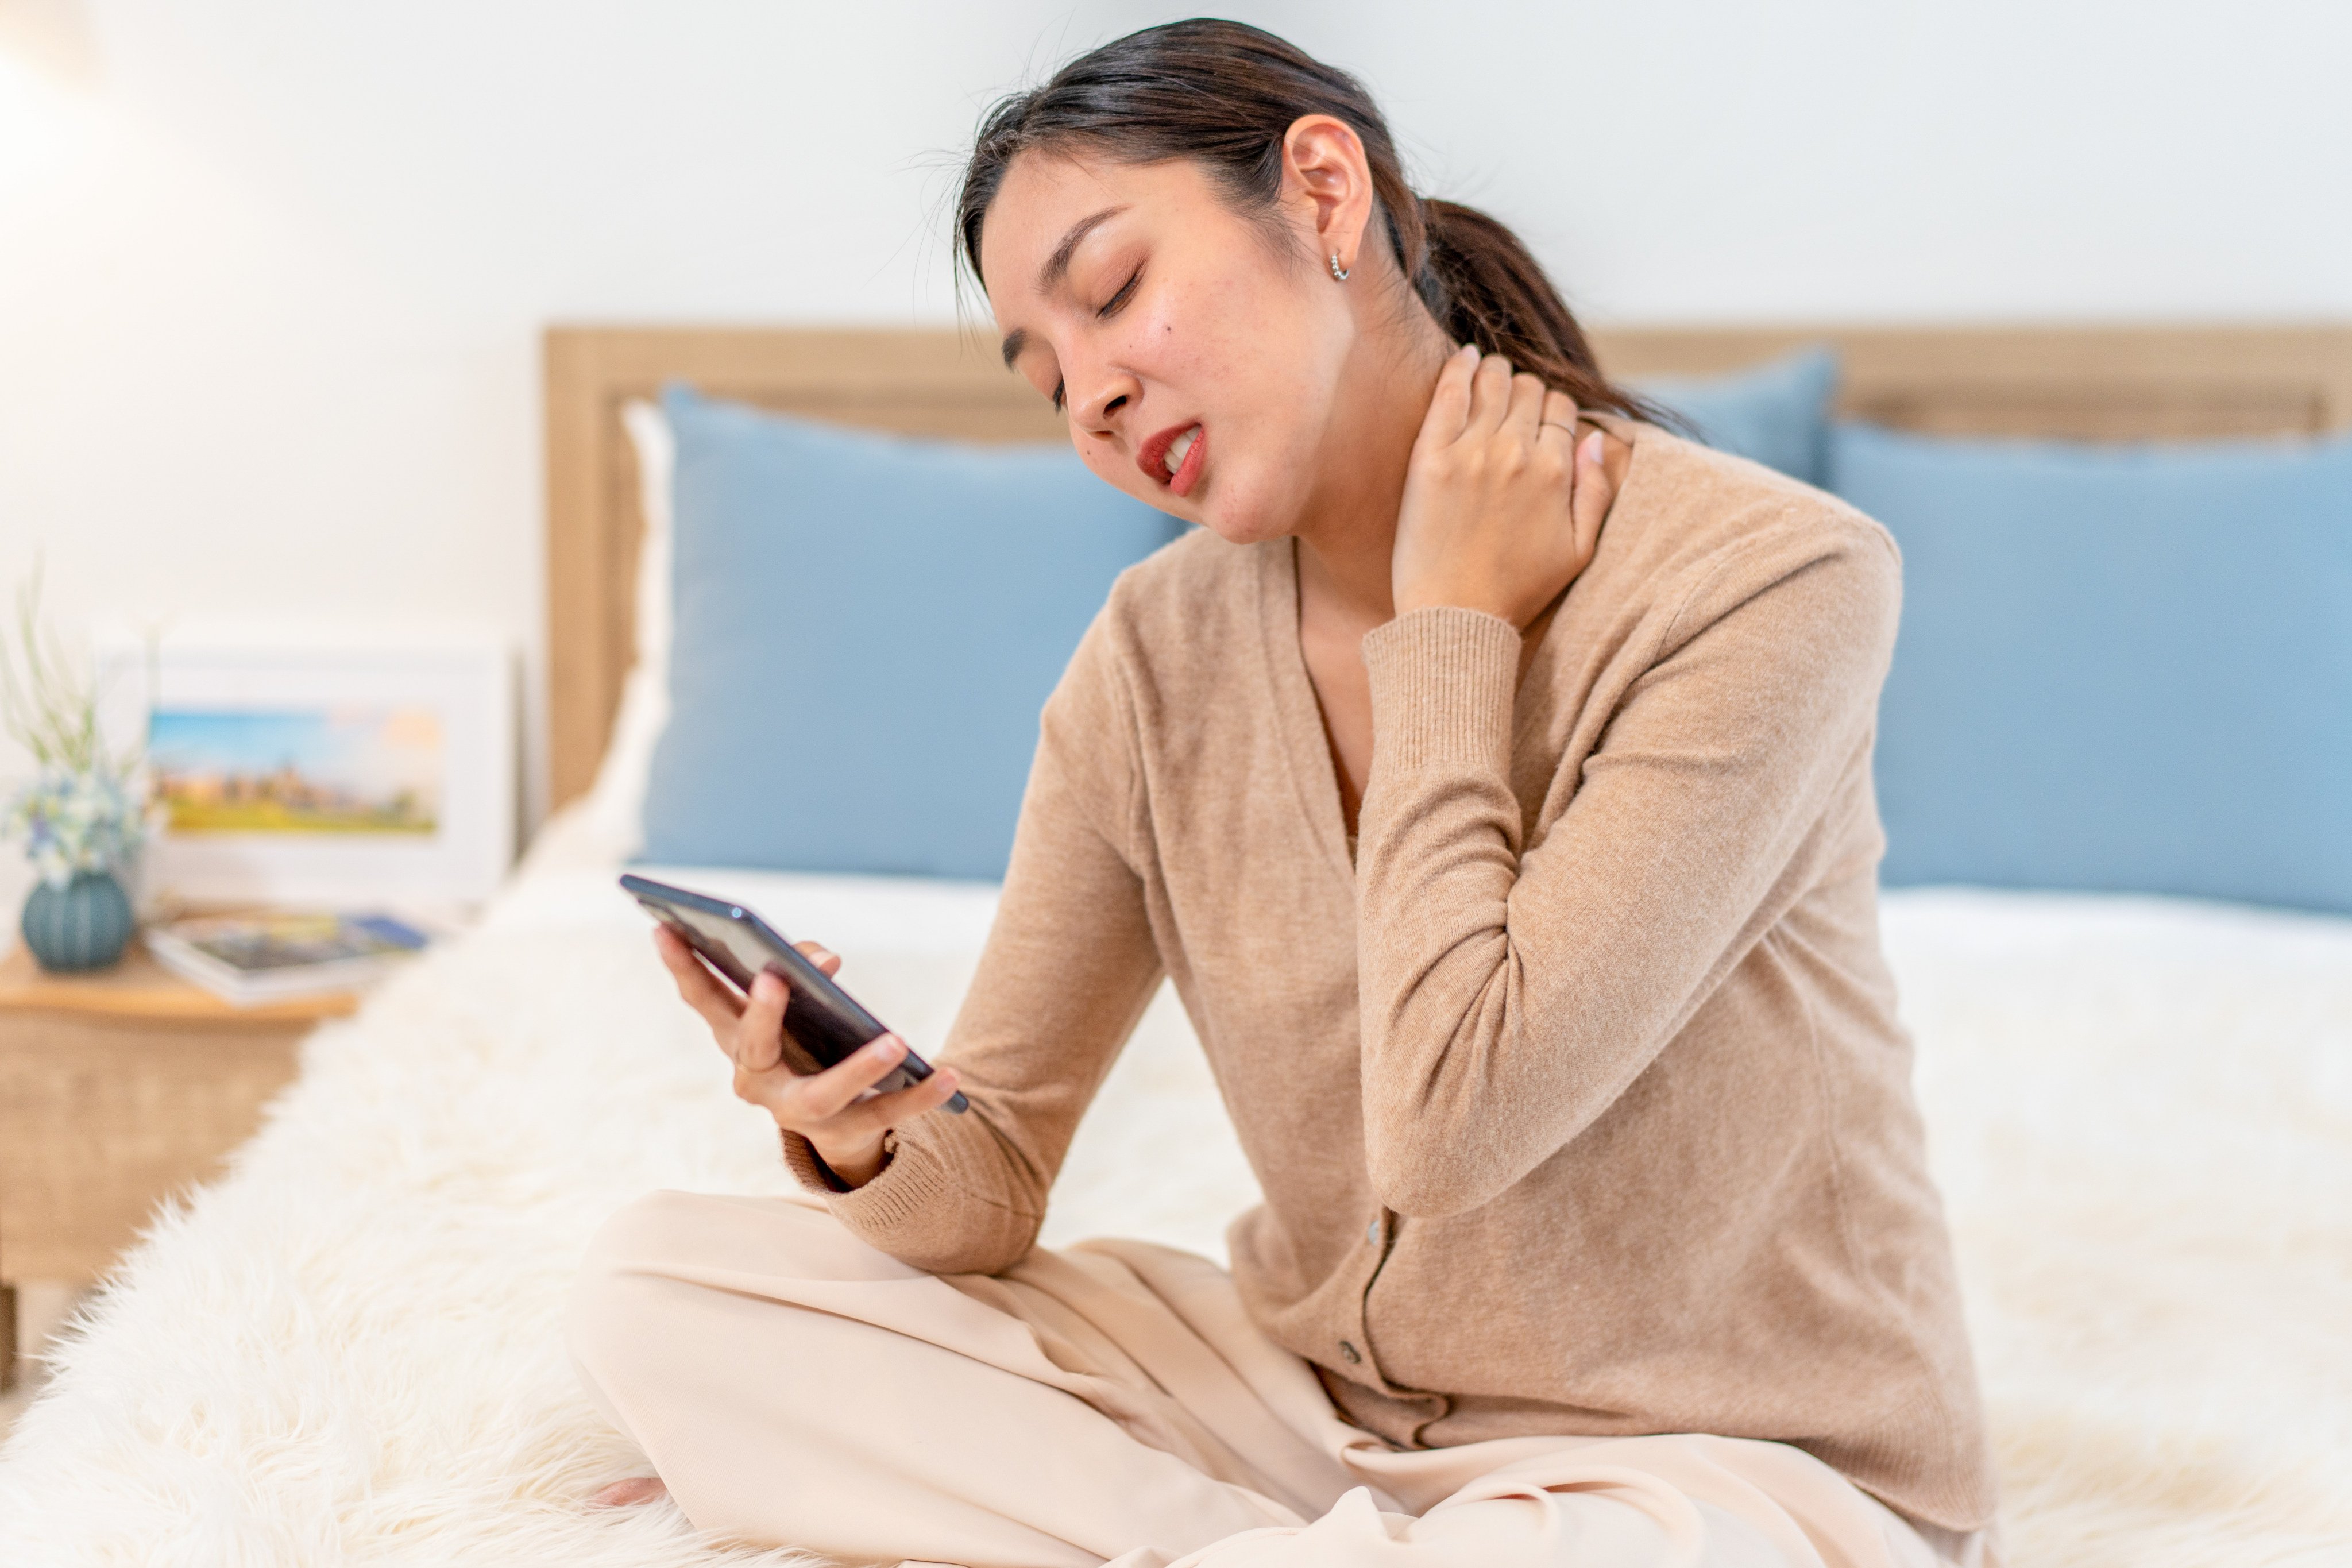 One in three people suffer neck pain each year. Hong Kong experts explain why it is easy to develop neck pain, and the lifestyle changes you can make to prevent it. Photo: Getty Images